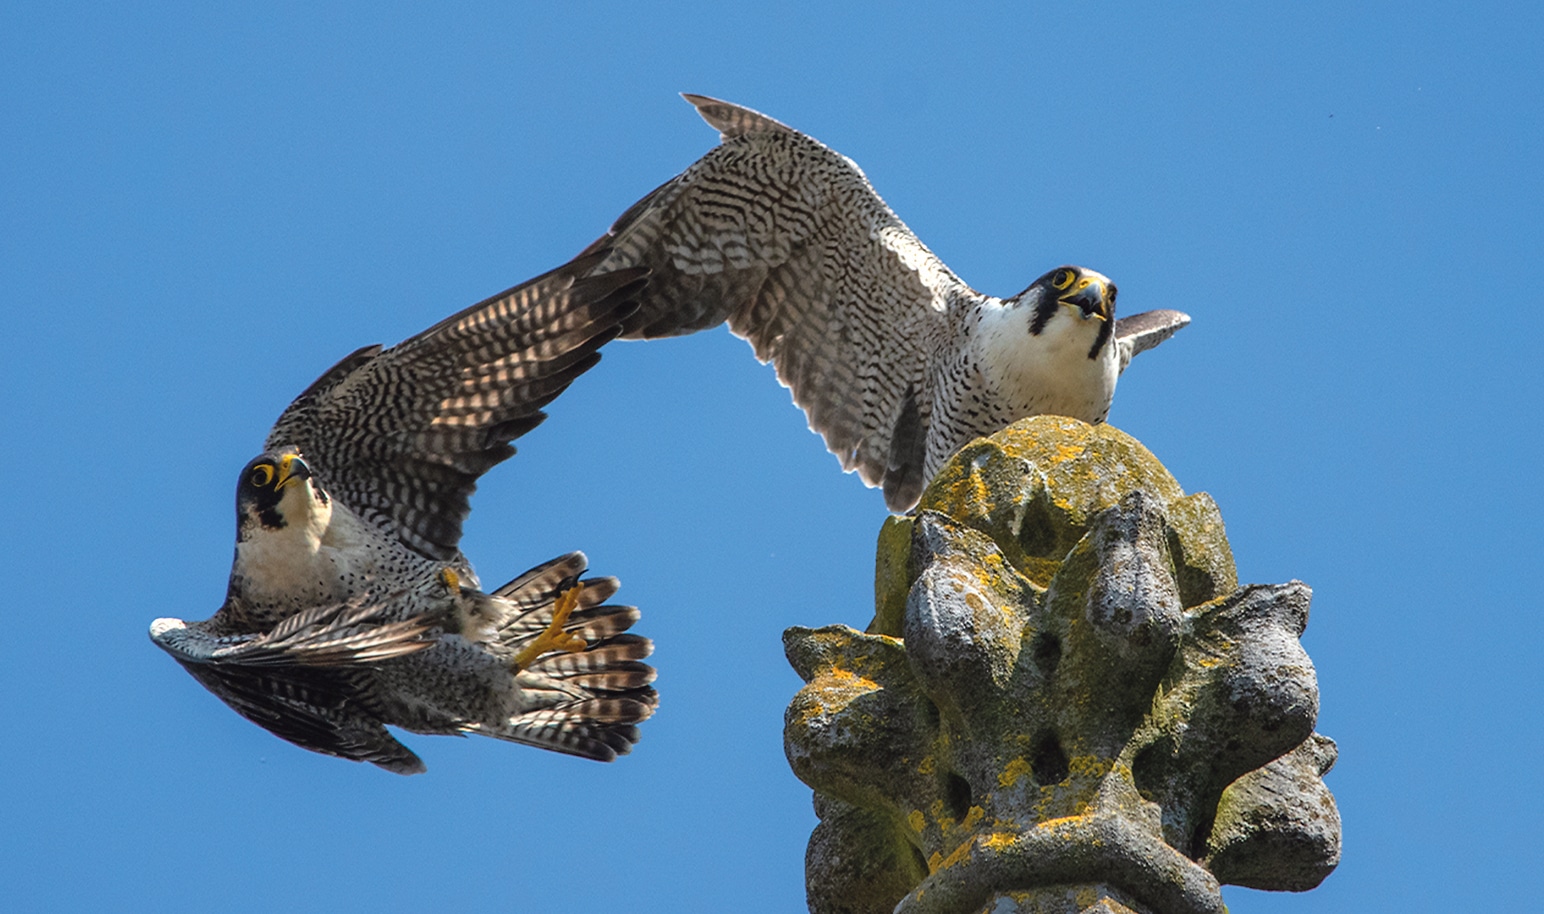 Clonakilty welcomes the planet’s fastest animal – the peregrine falcon